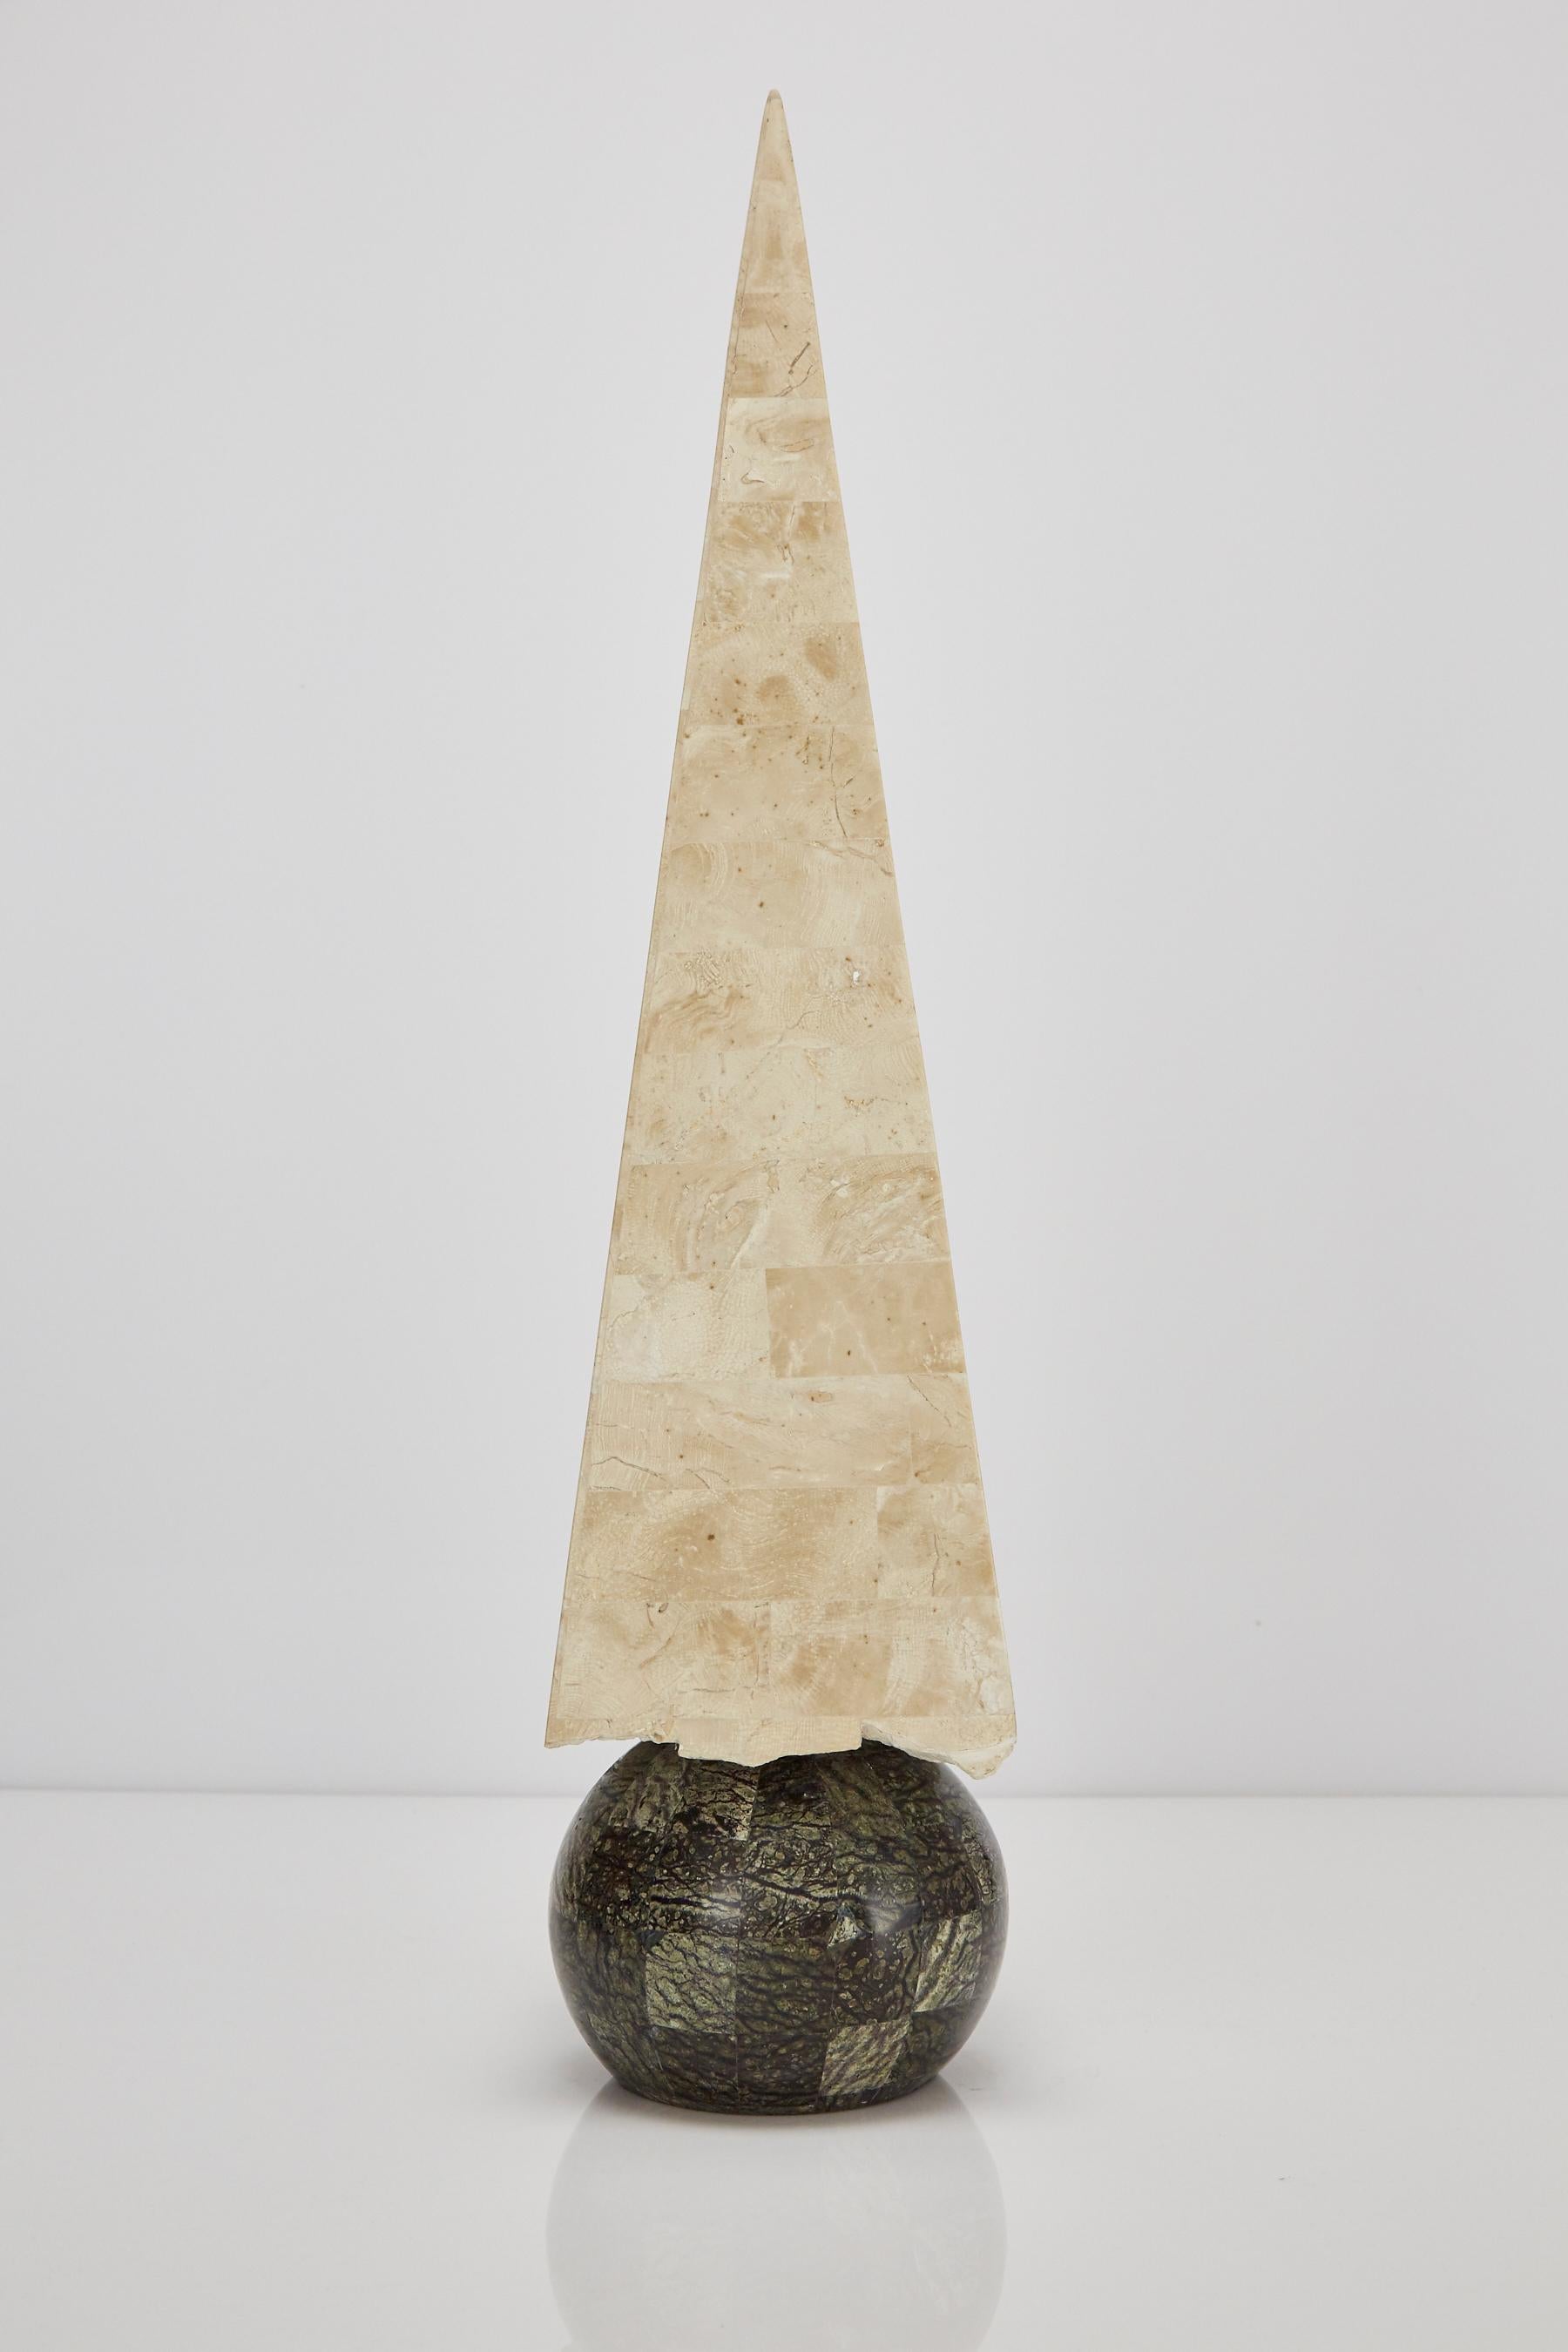 Tall 32 in. tall decorative obelisk. The pyramid executed in tessellated beige fossil stone and round base executed in Serpentine stone. 

Coordinates with items LU1484211449871 and LU1484211449861 for a set of three.

All furnishings are made from